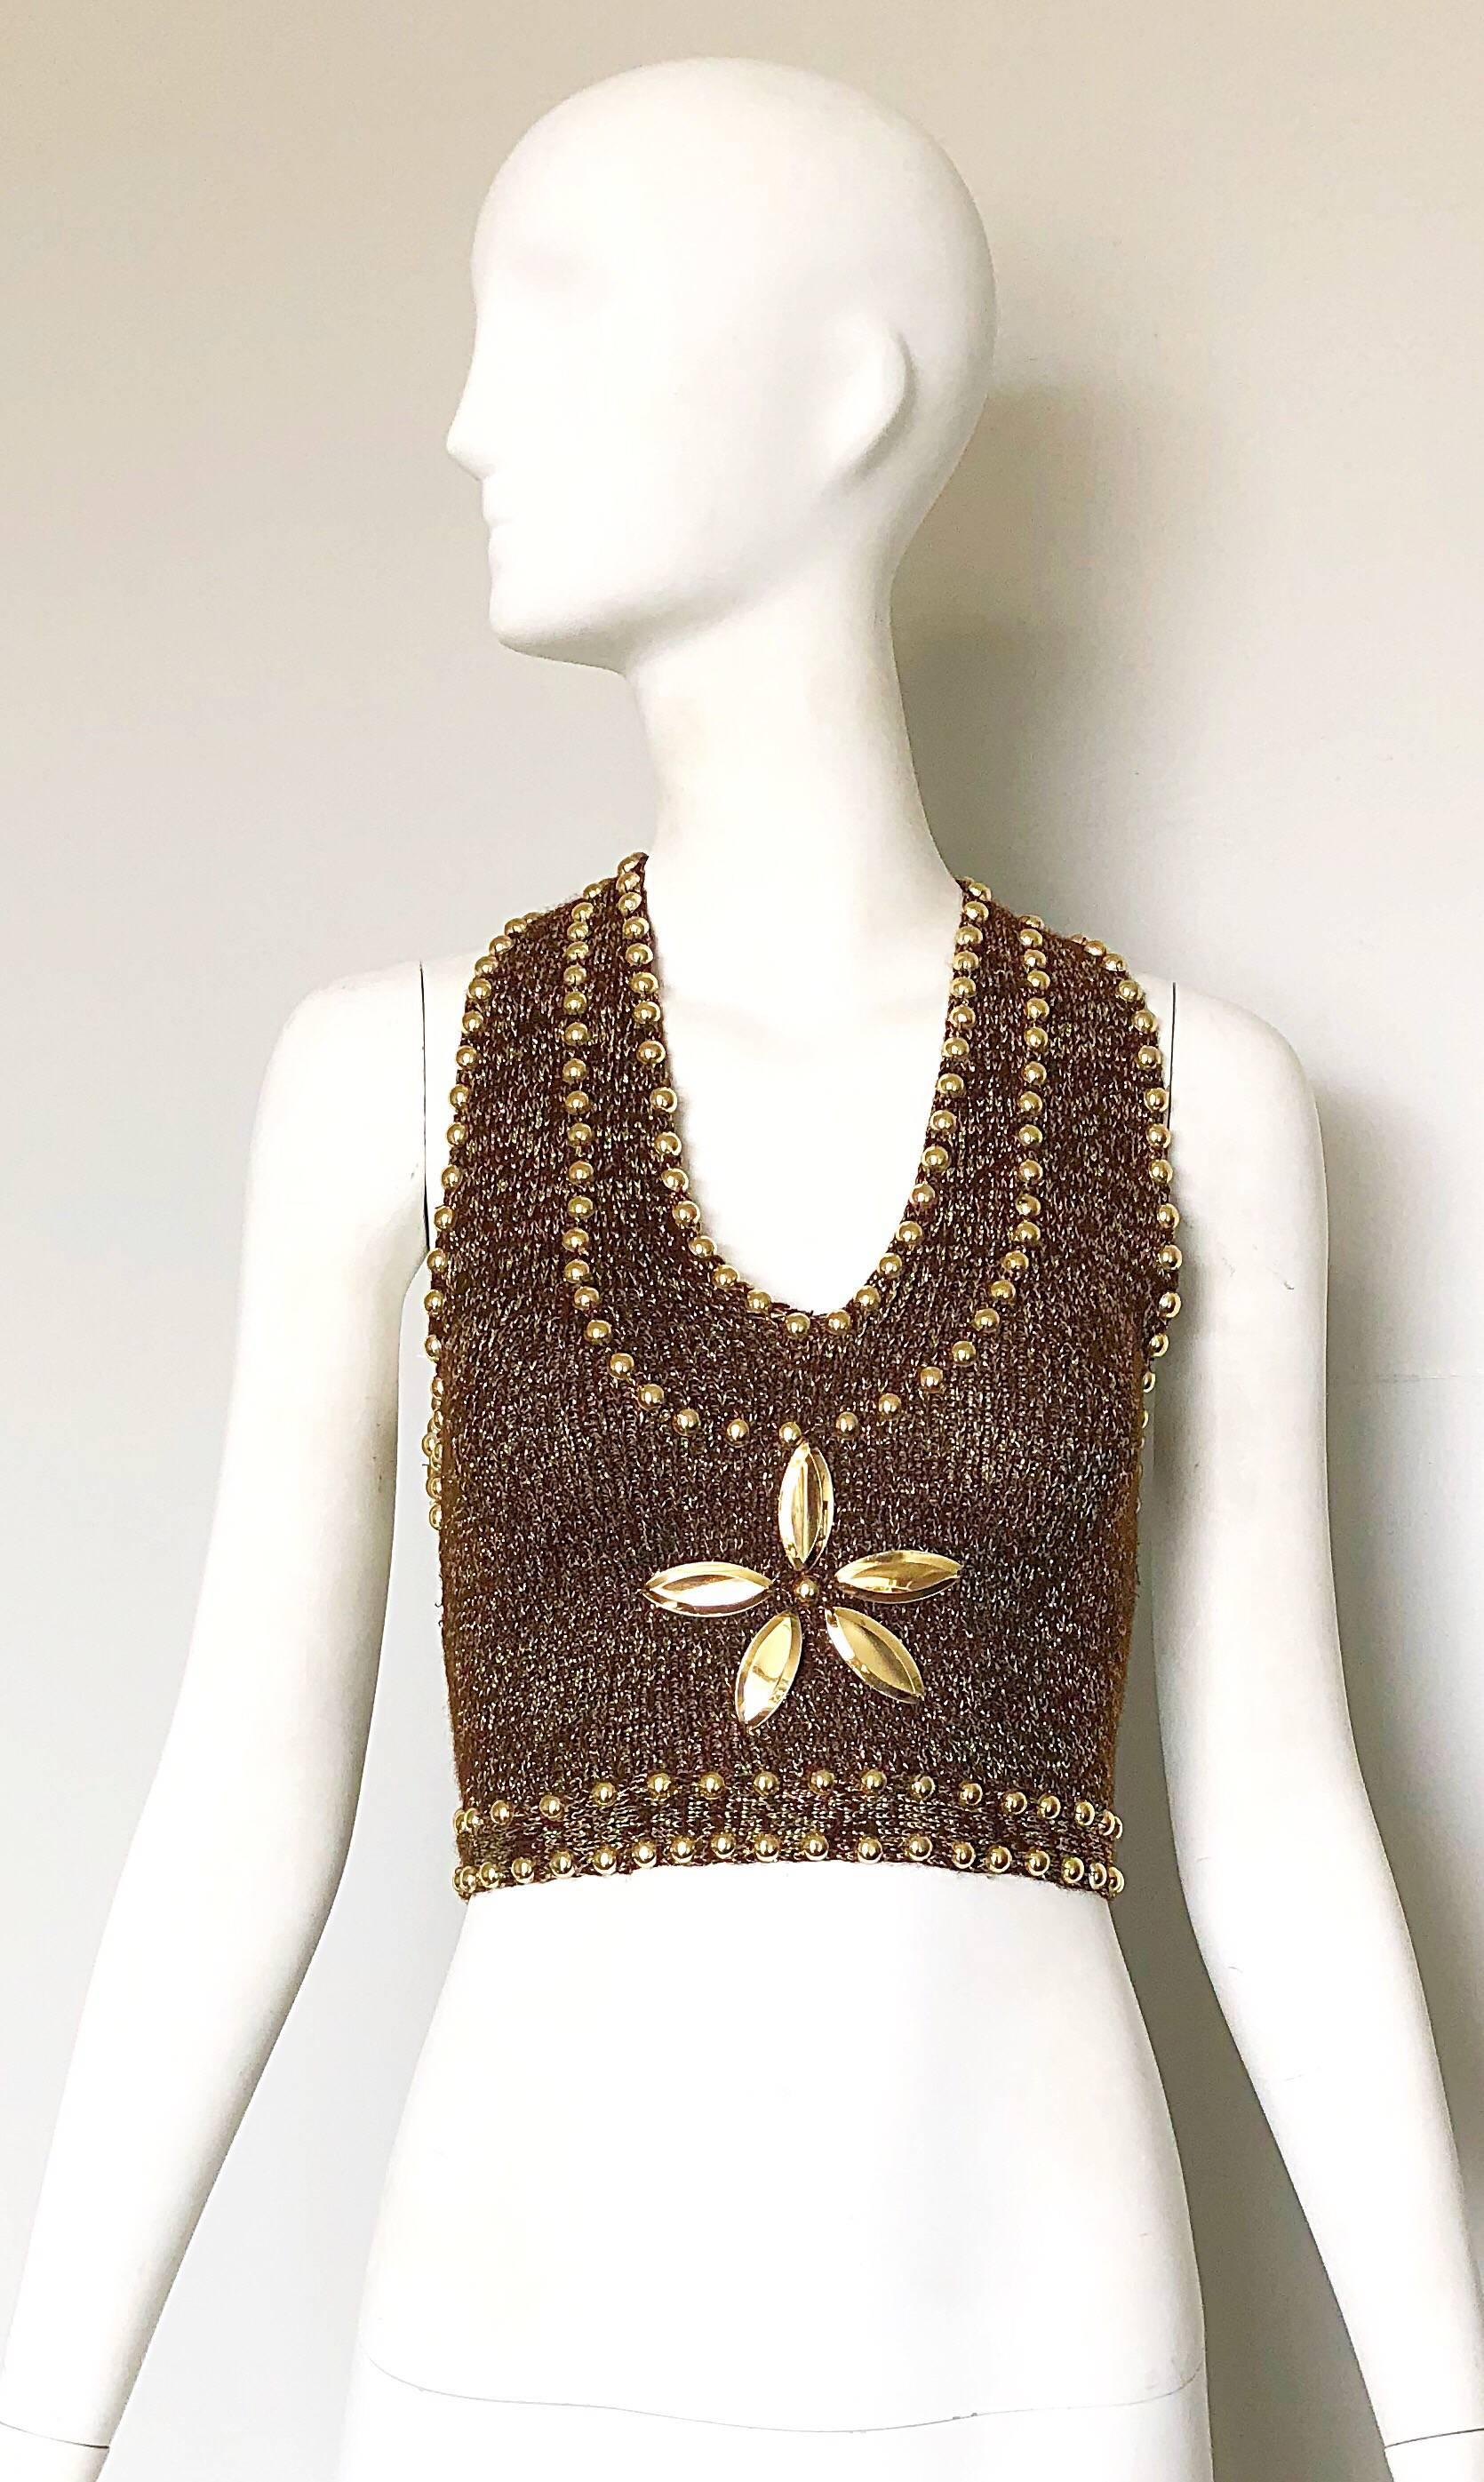 Sexy early 1970s CARDINALI Couture original sample brown and gold studded knit halter crop top! This rare gem comes from the estate of Marilyn Lewis, who was the founder / designer for Cardinali. Features a soft hand-woven brown and metallic gold